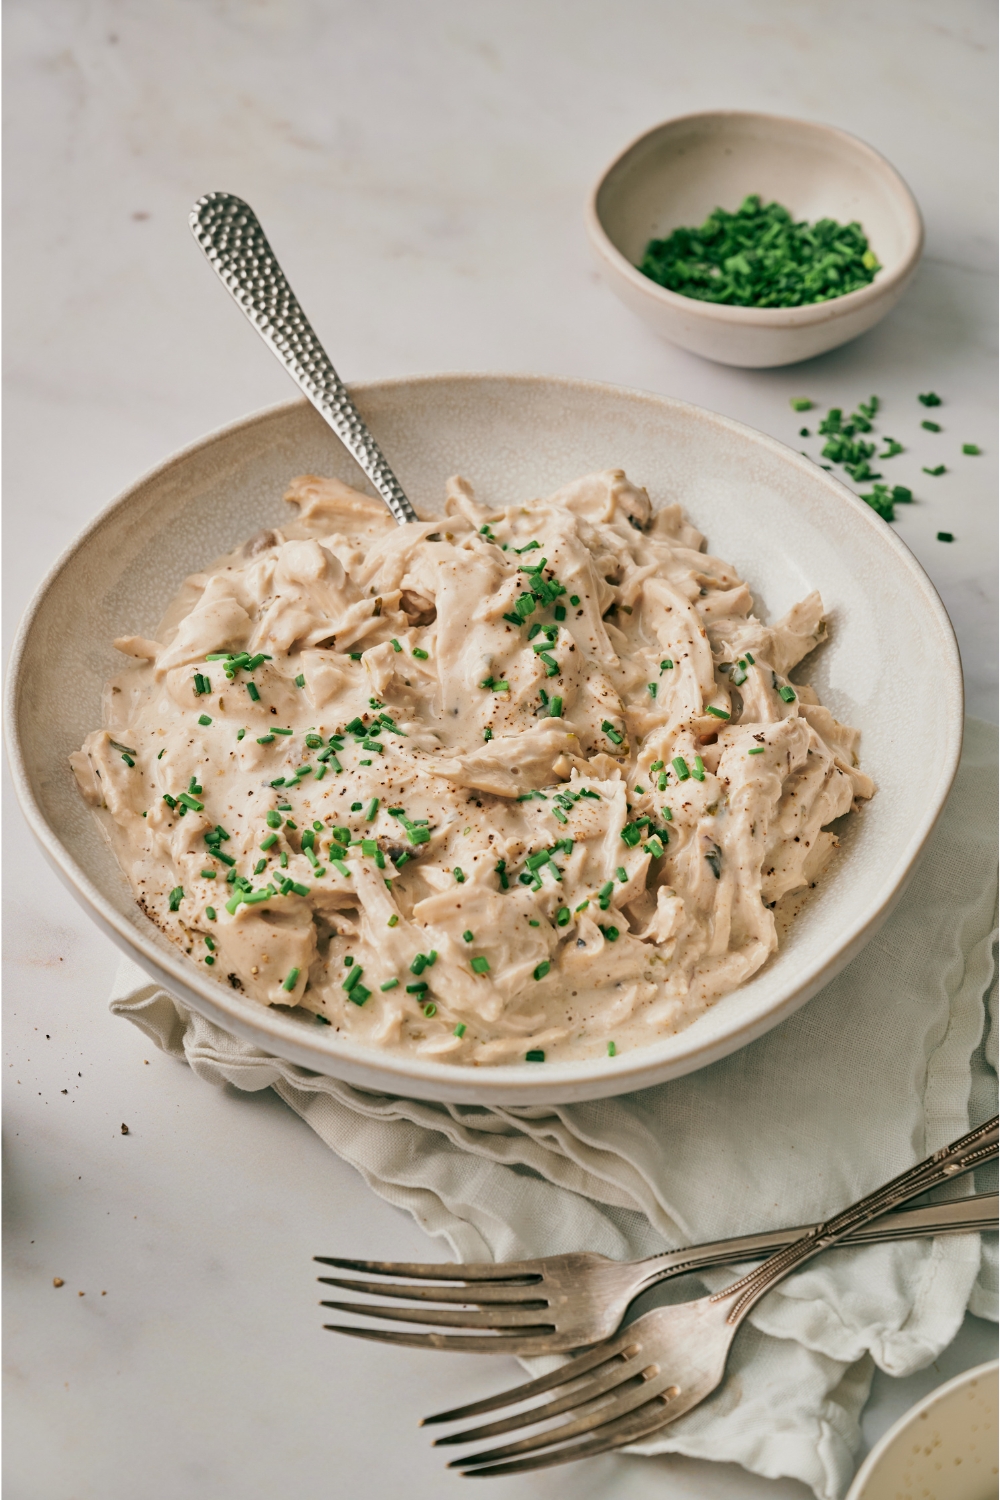 A bowl with cream cheese chicken garnished with chives.